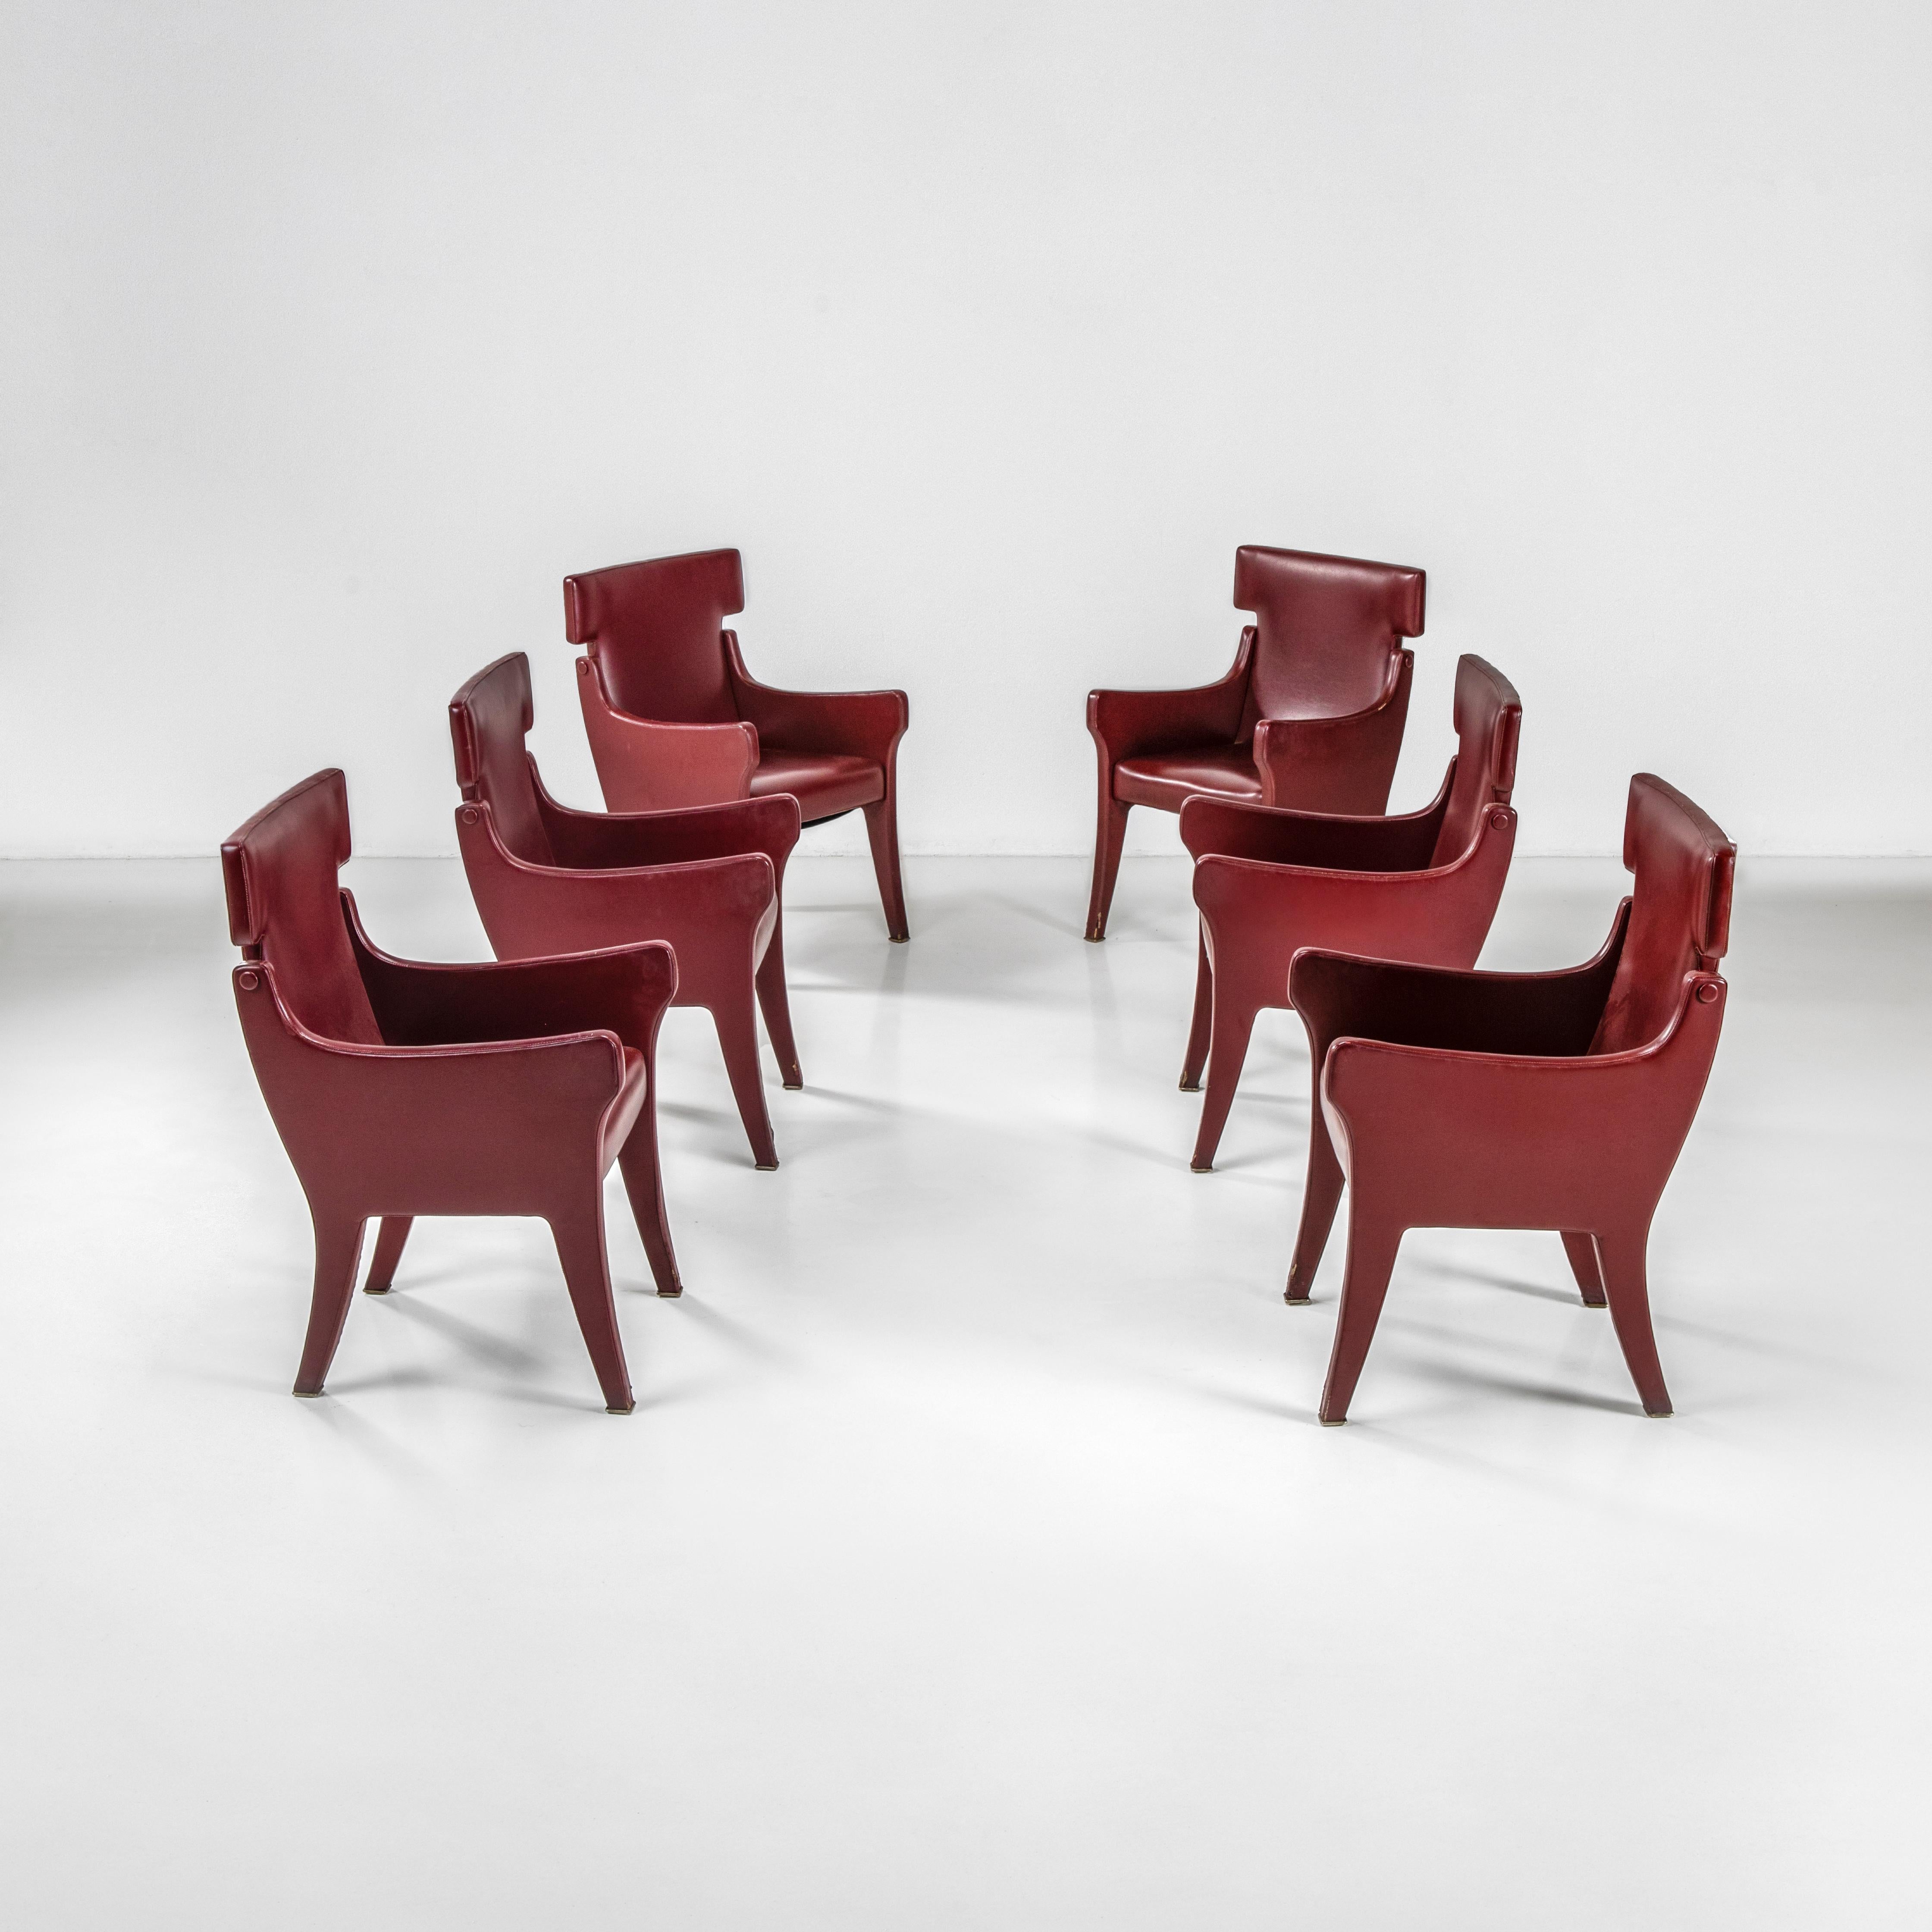 These six rare model P10 upholstered armchairs are an elegant and decorative creation by Ignazio Gardella, one of the masters of 20th-century Italian design. The six armchairs are upholstered in skai, a synthetic vinyl leather much in use in those